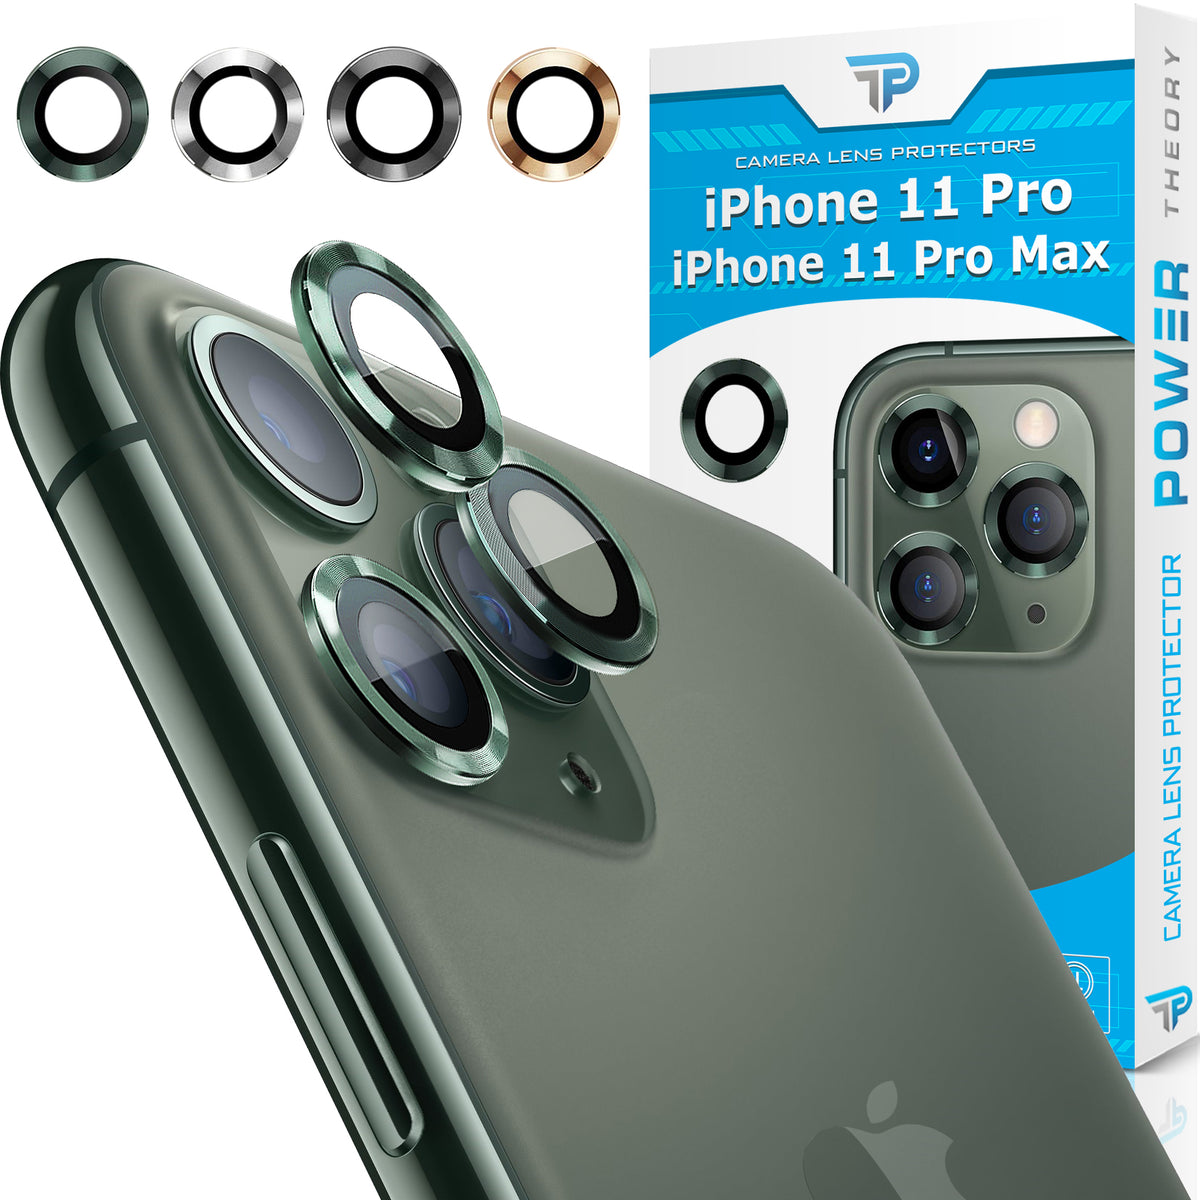 iPhone 11 Pro / 11 Pro Max Tempered Glass Camera Lens Protector [3-Pack] Cover